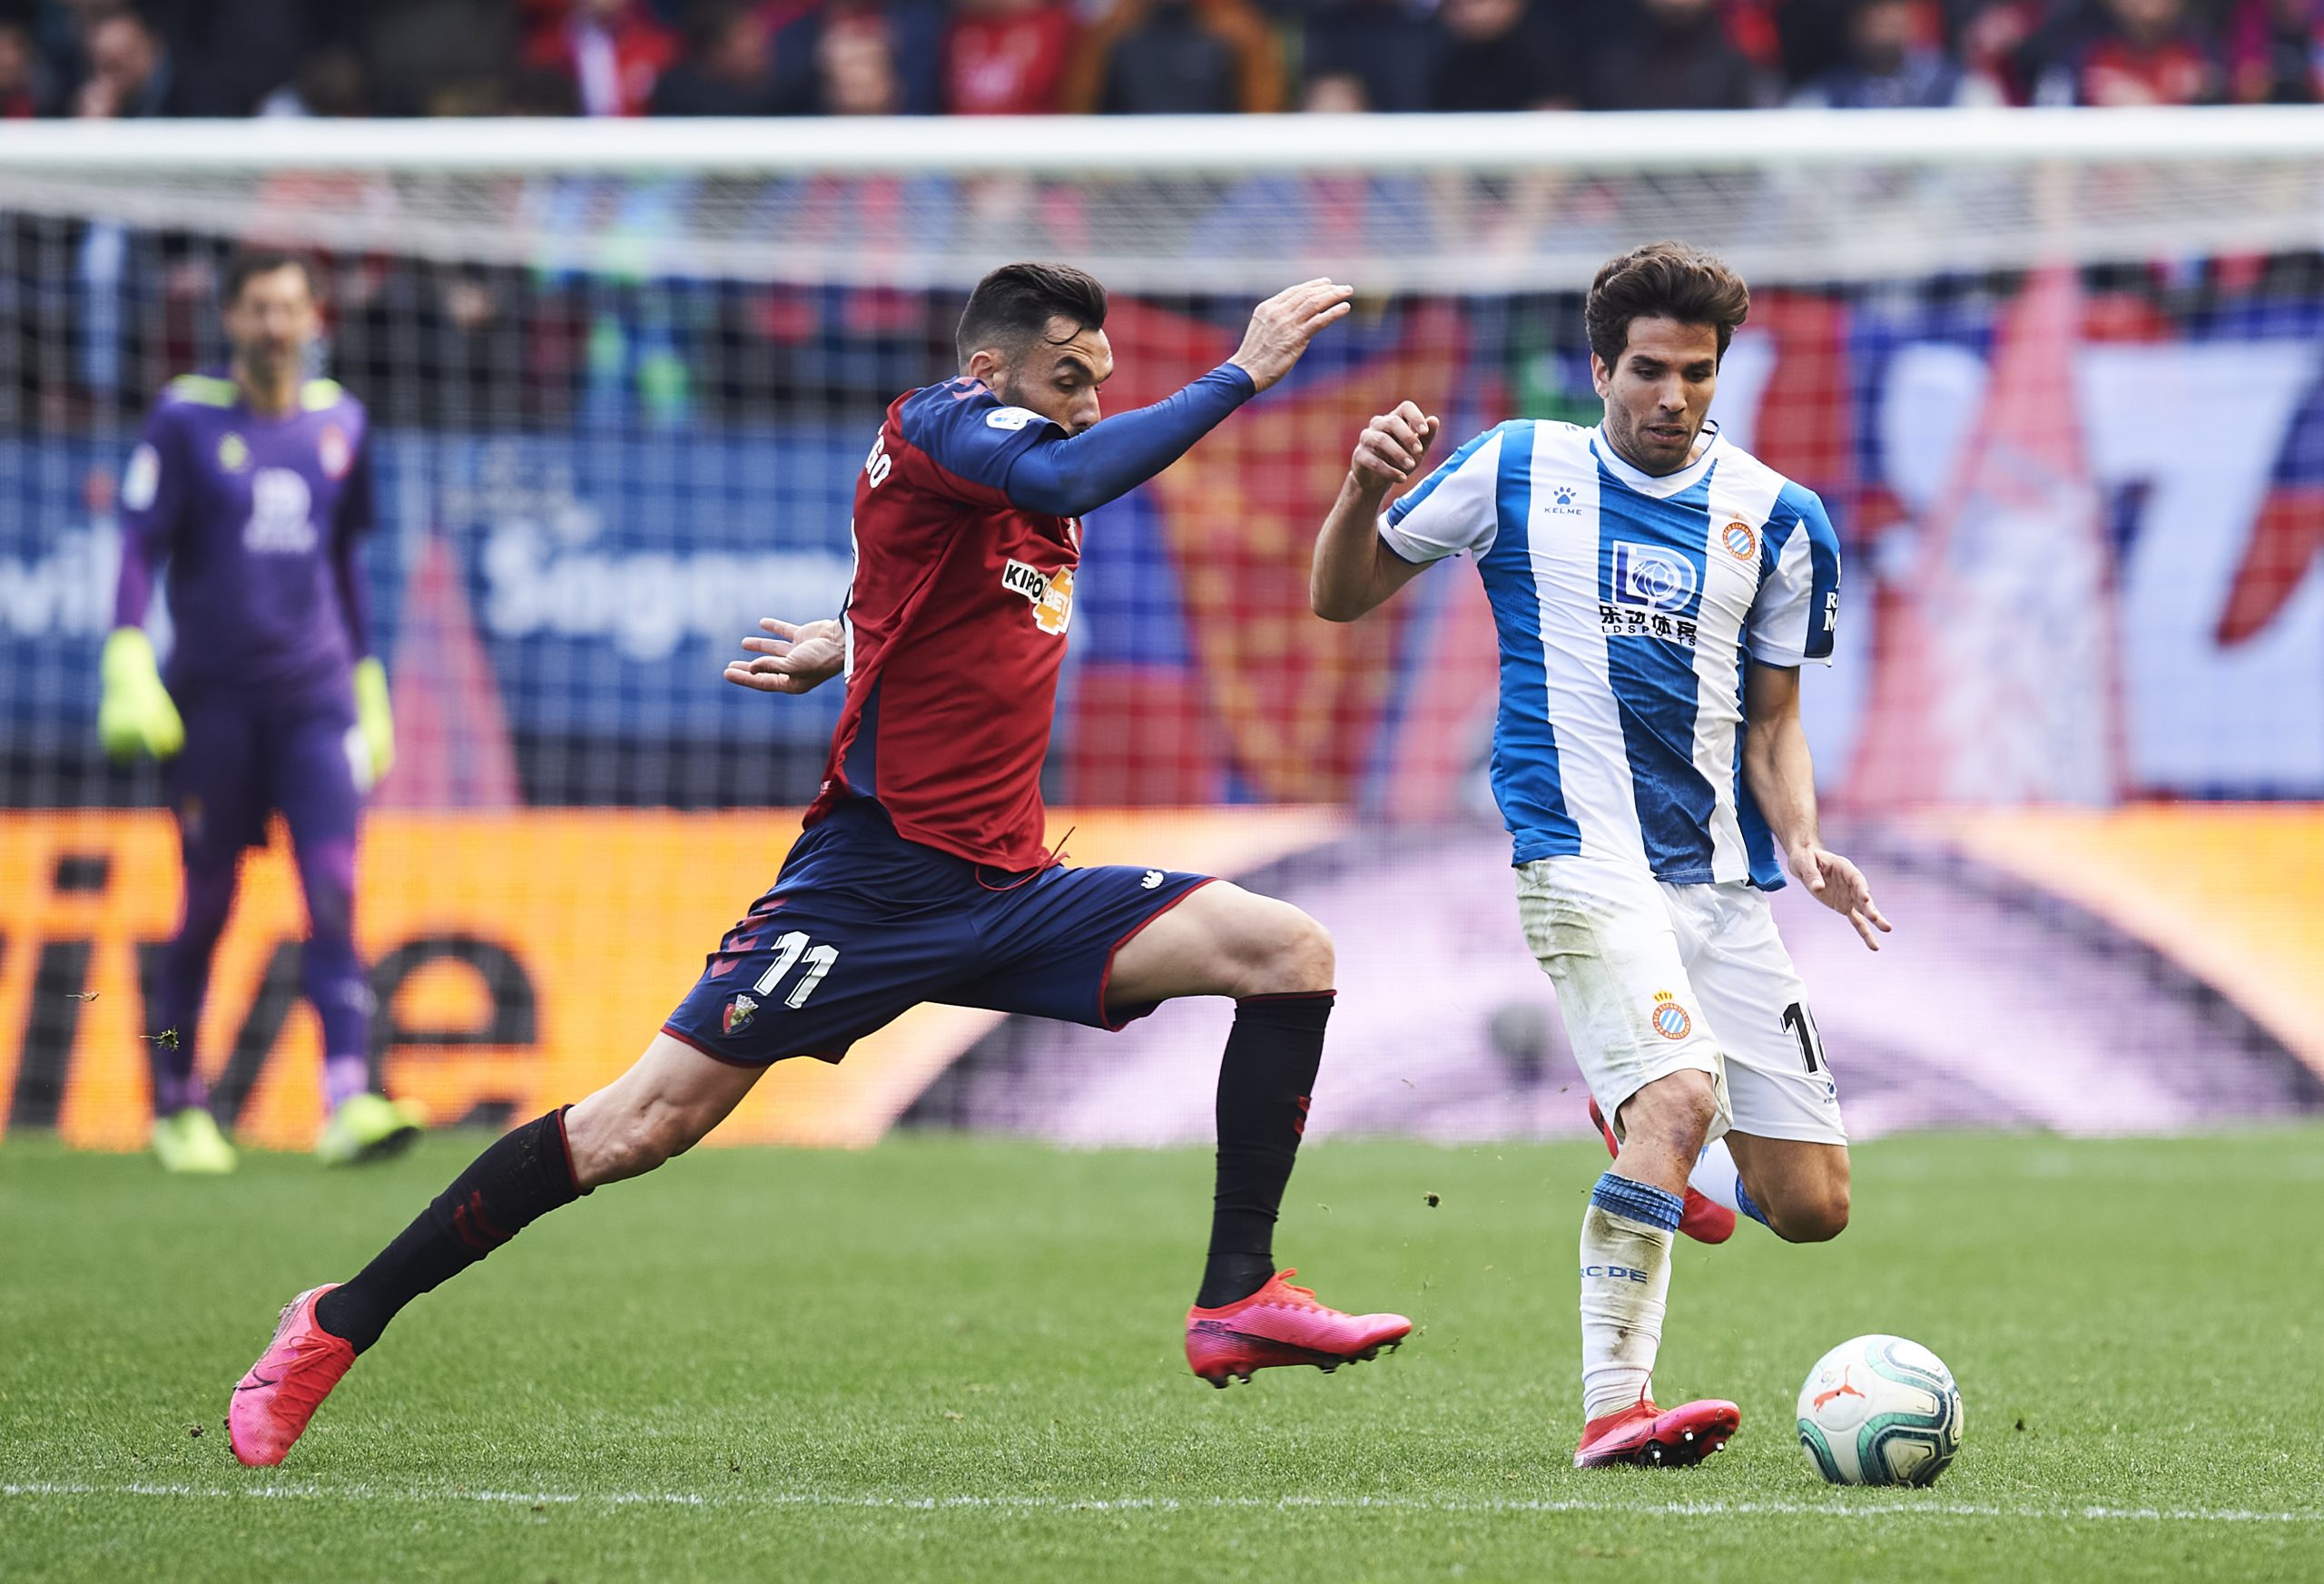 Leandro Cabrera (R) has impressed in a short time with Espanyol (Getty Images)